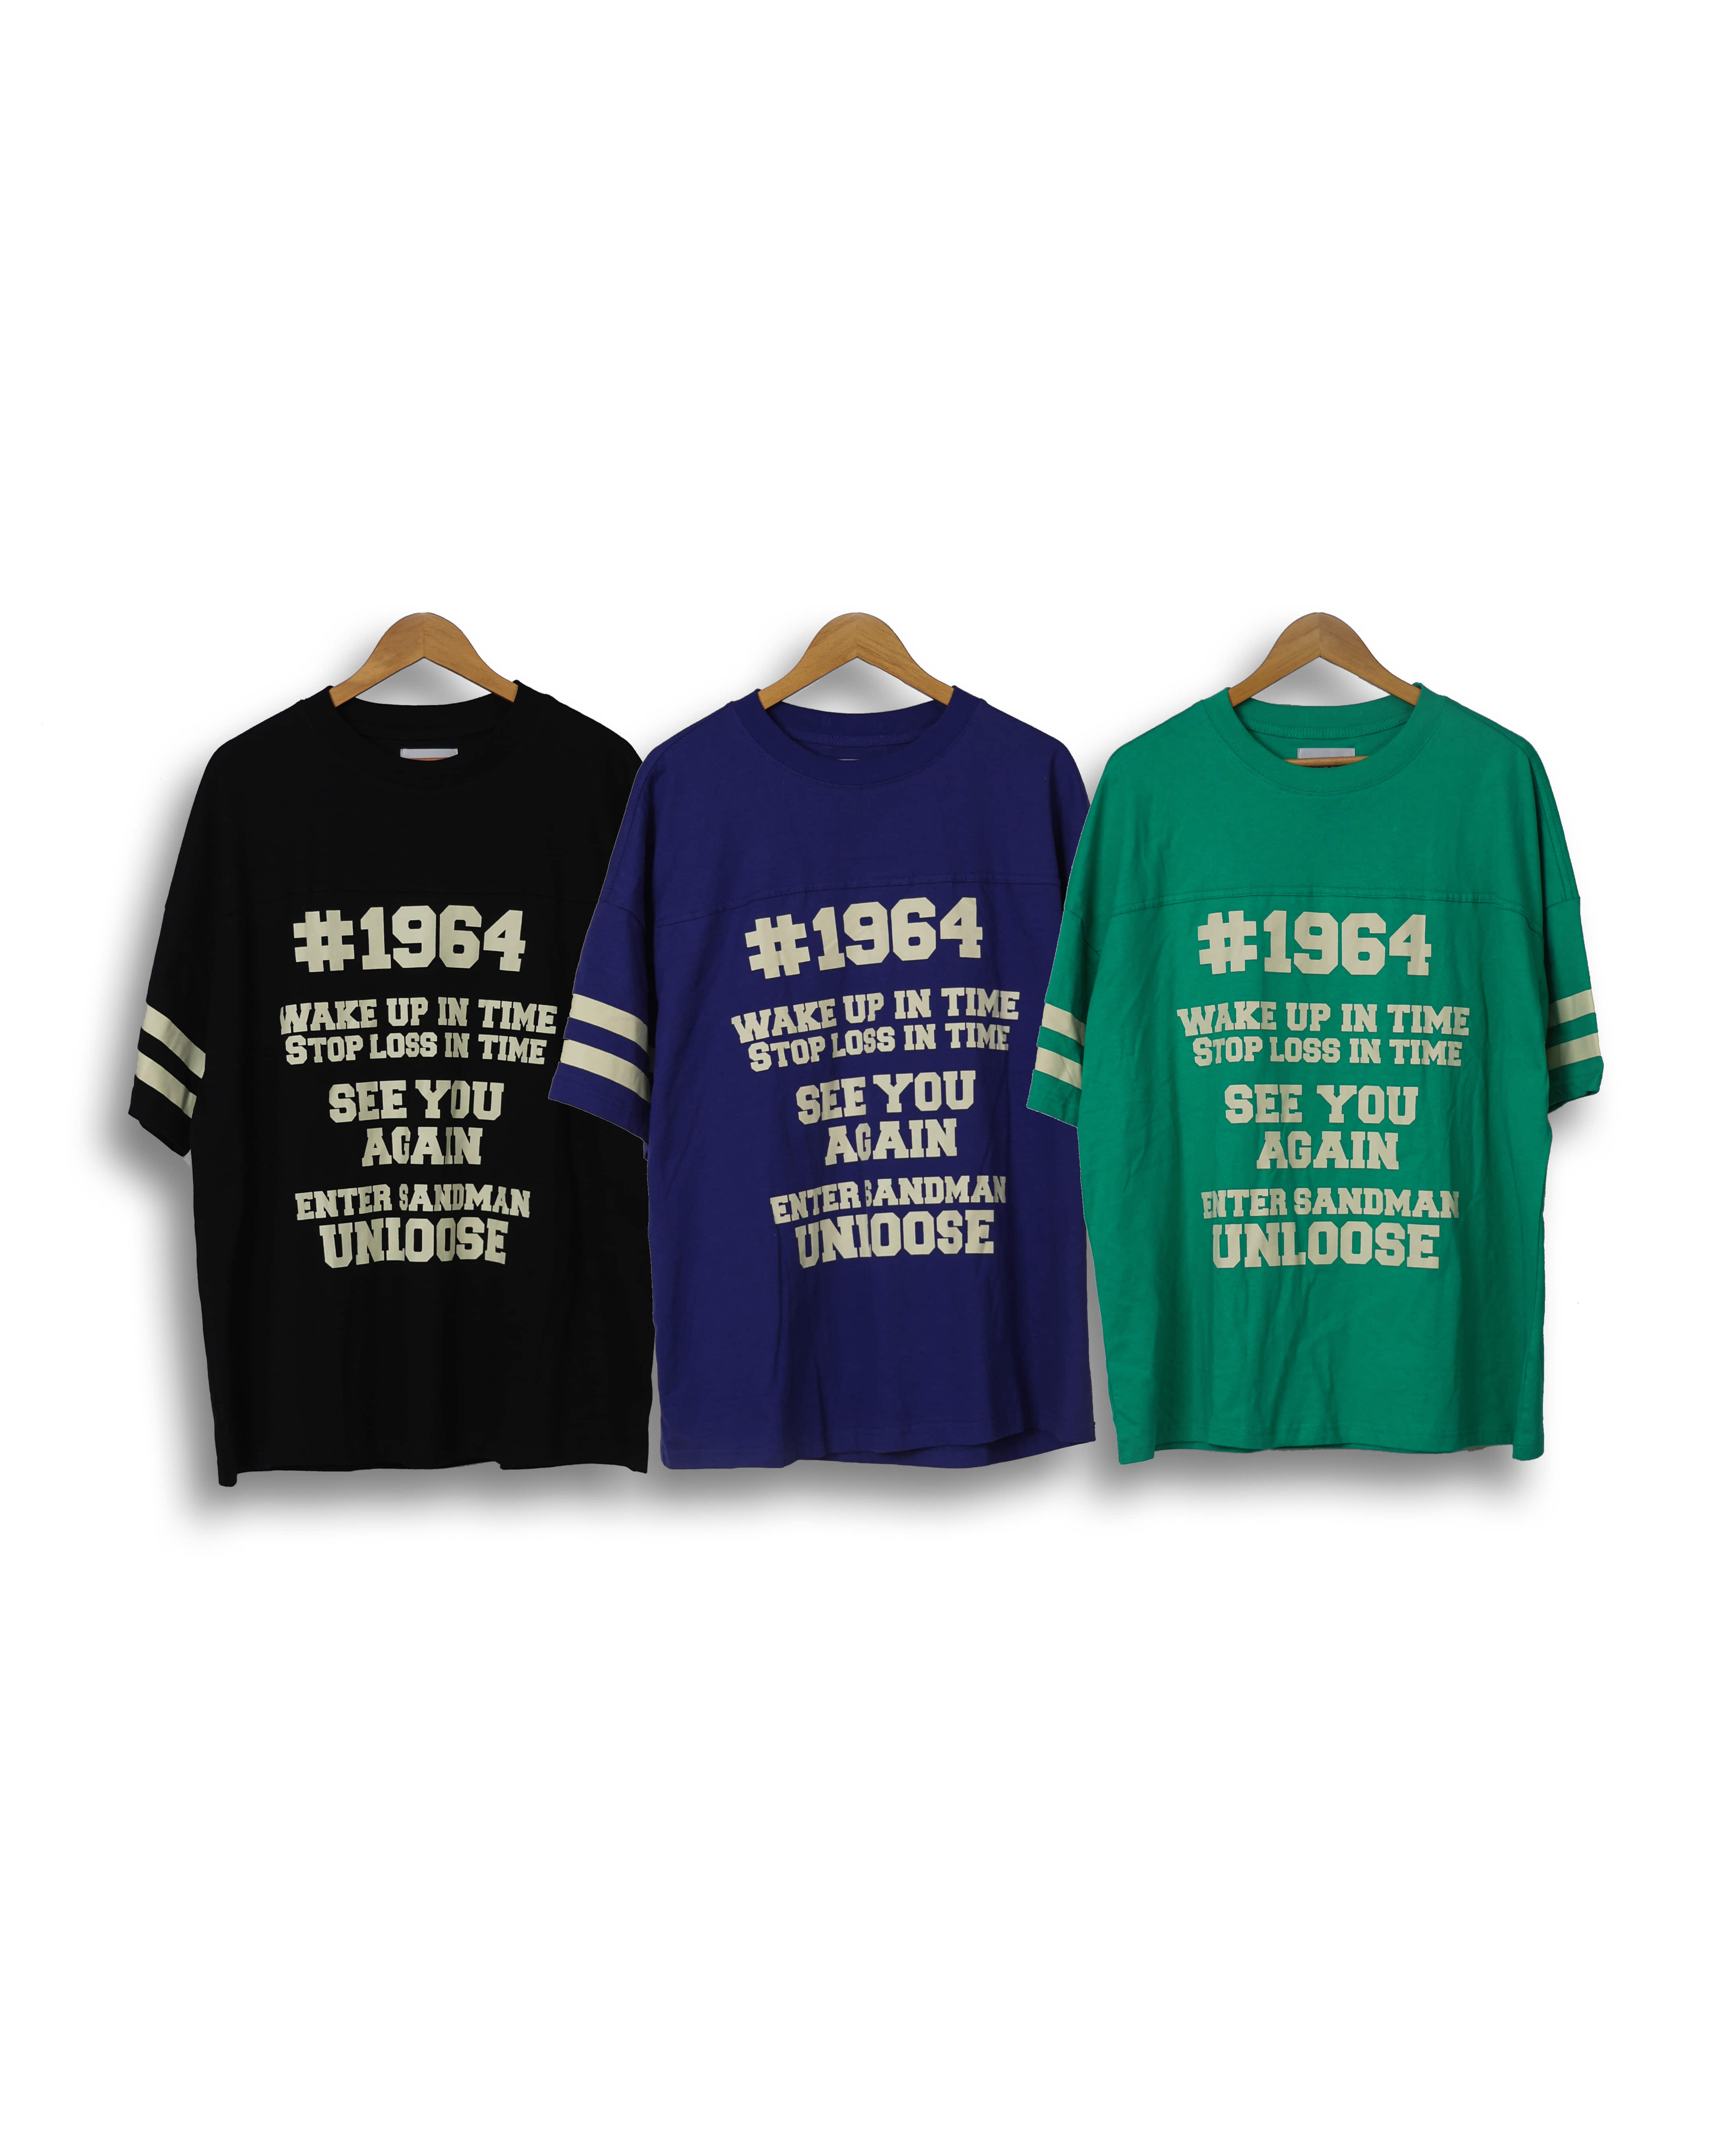 1964 Printed Casual Rugby Shirts (Black/Violet/Green)